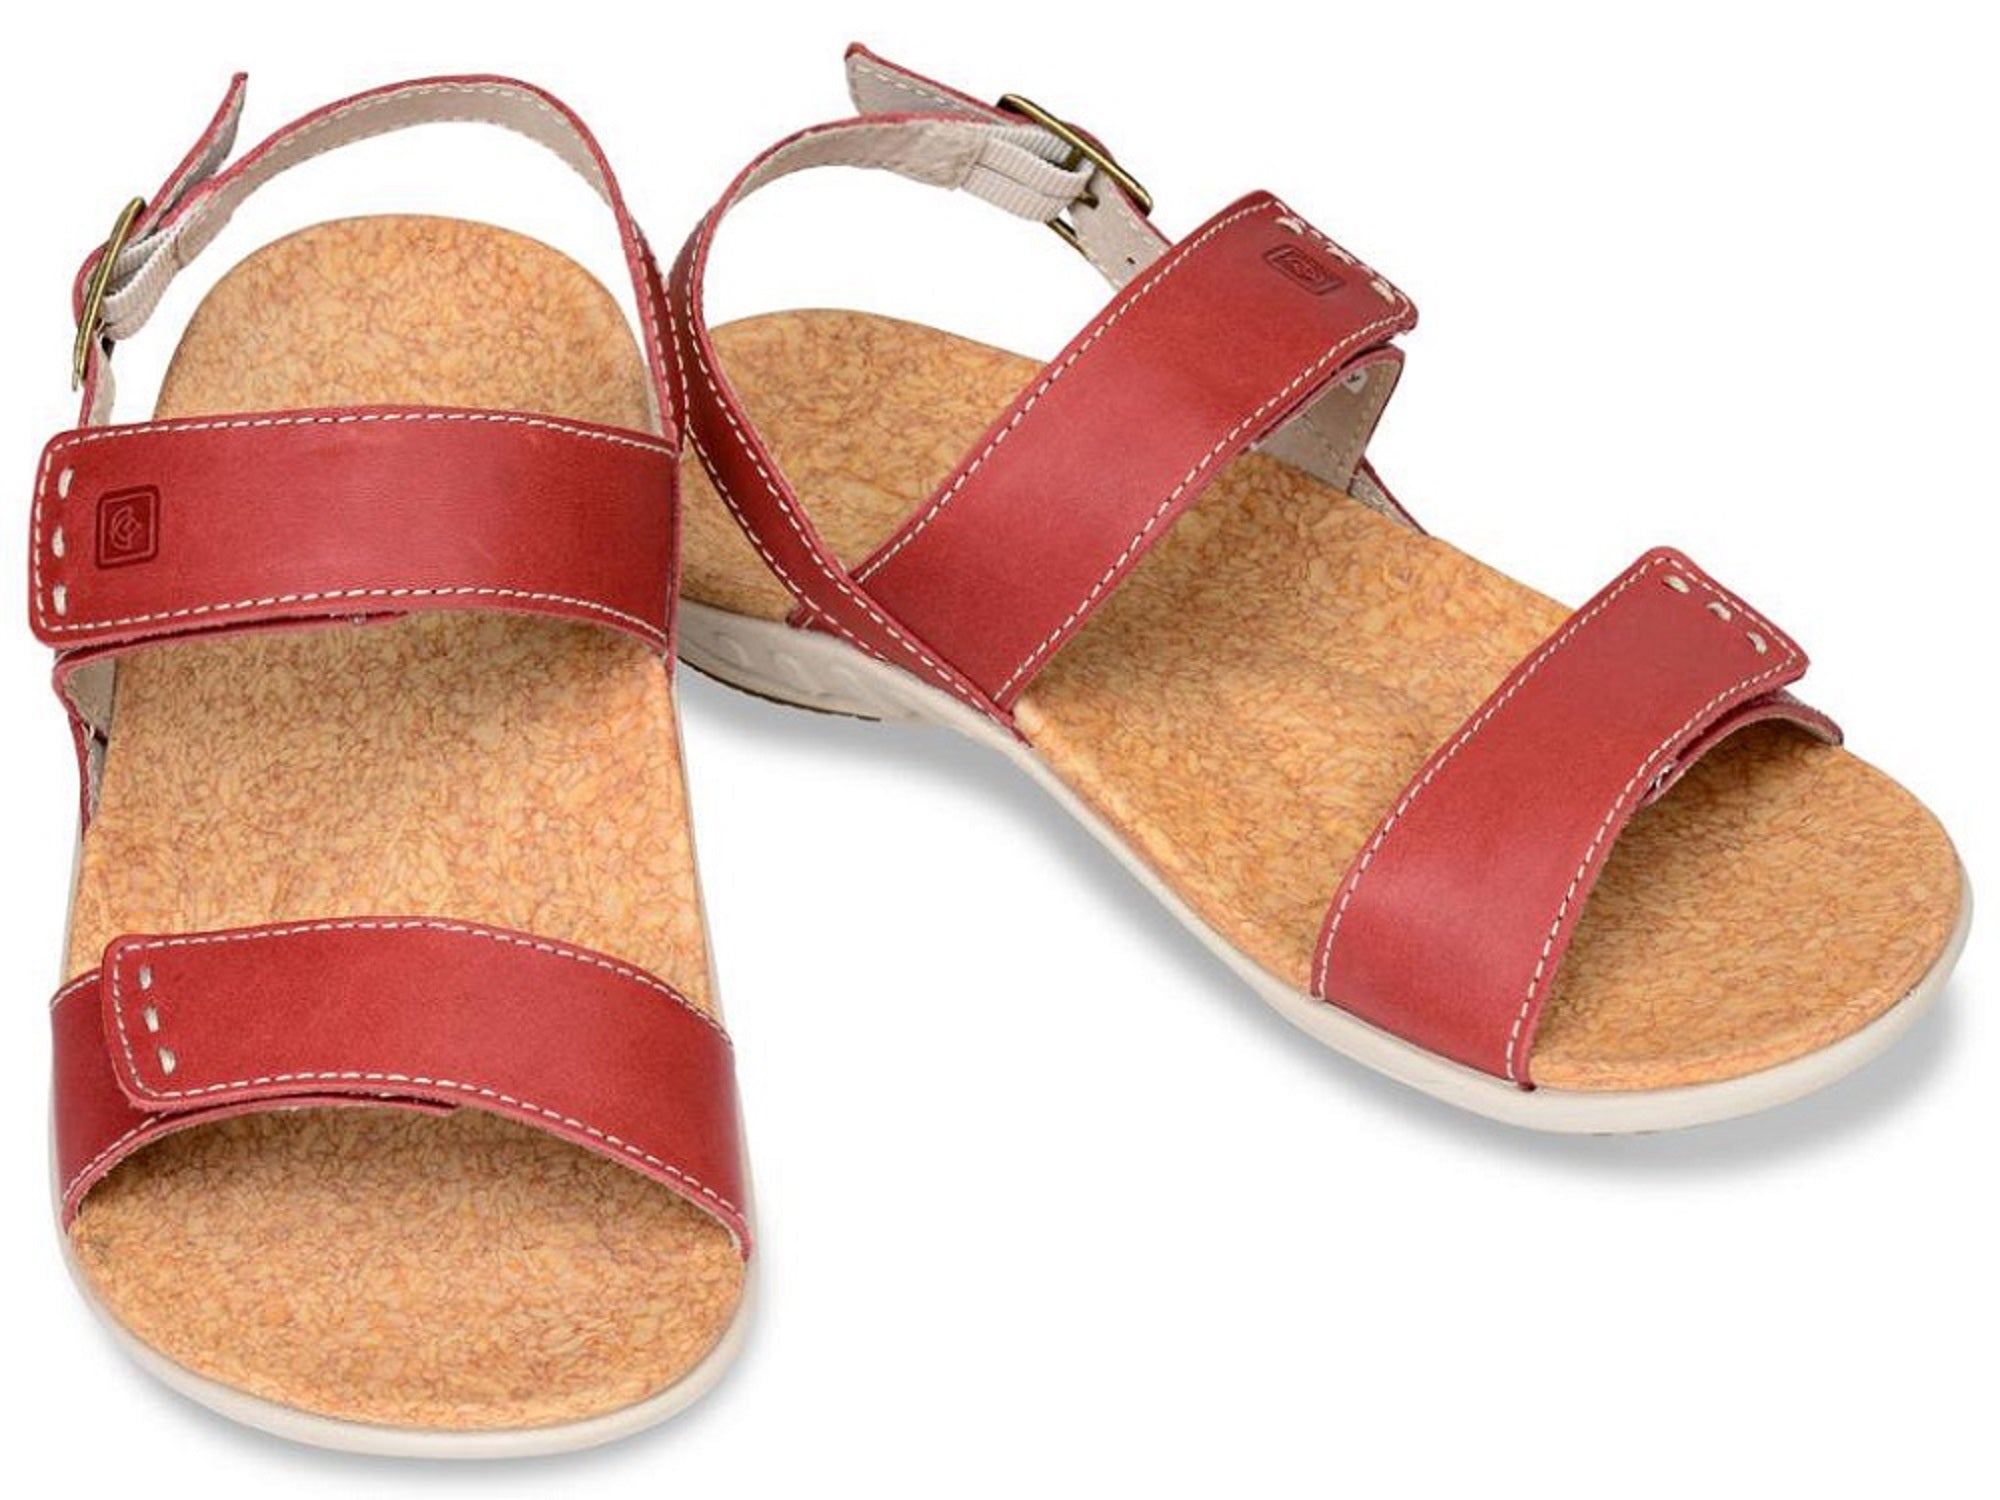 Spenco Alex Women's Strap Orthotic Sandals - Robin Red - Size 7